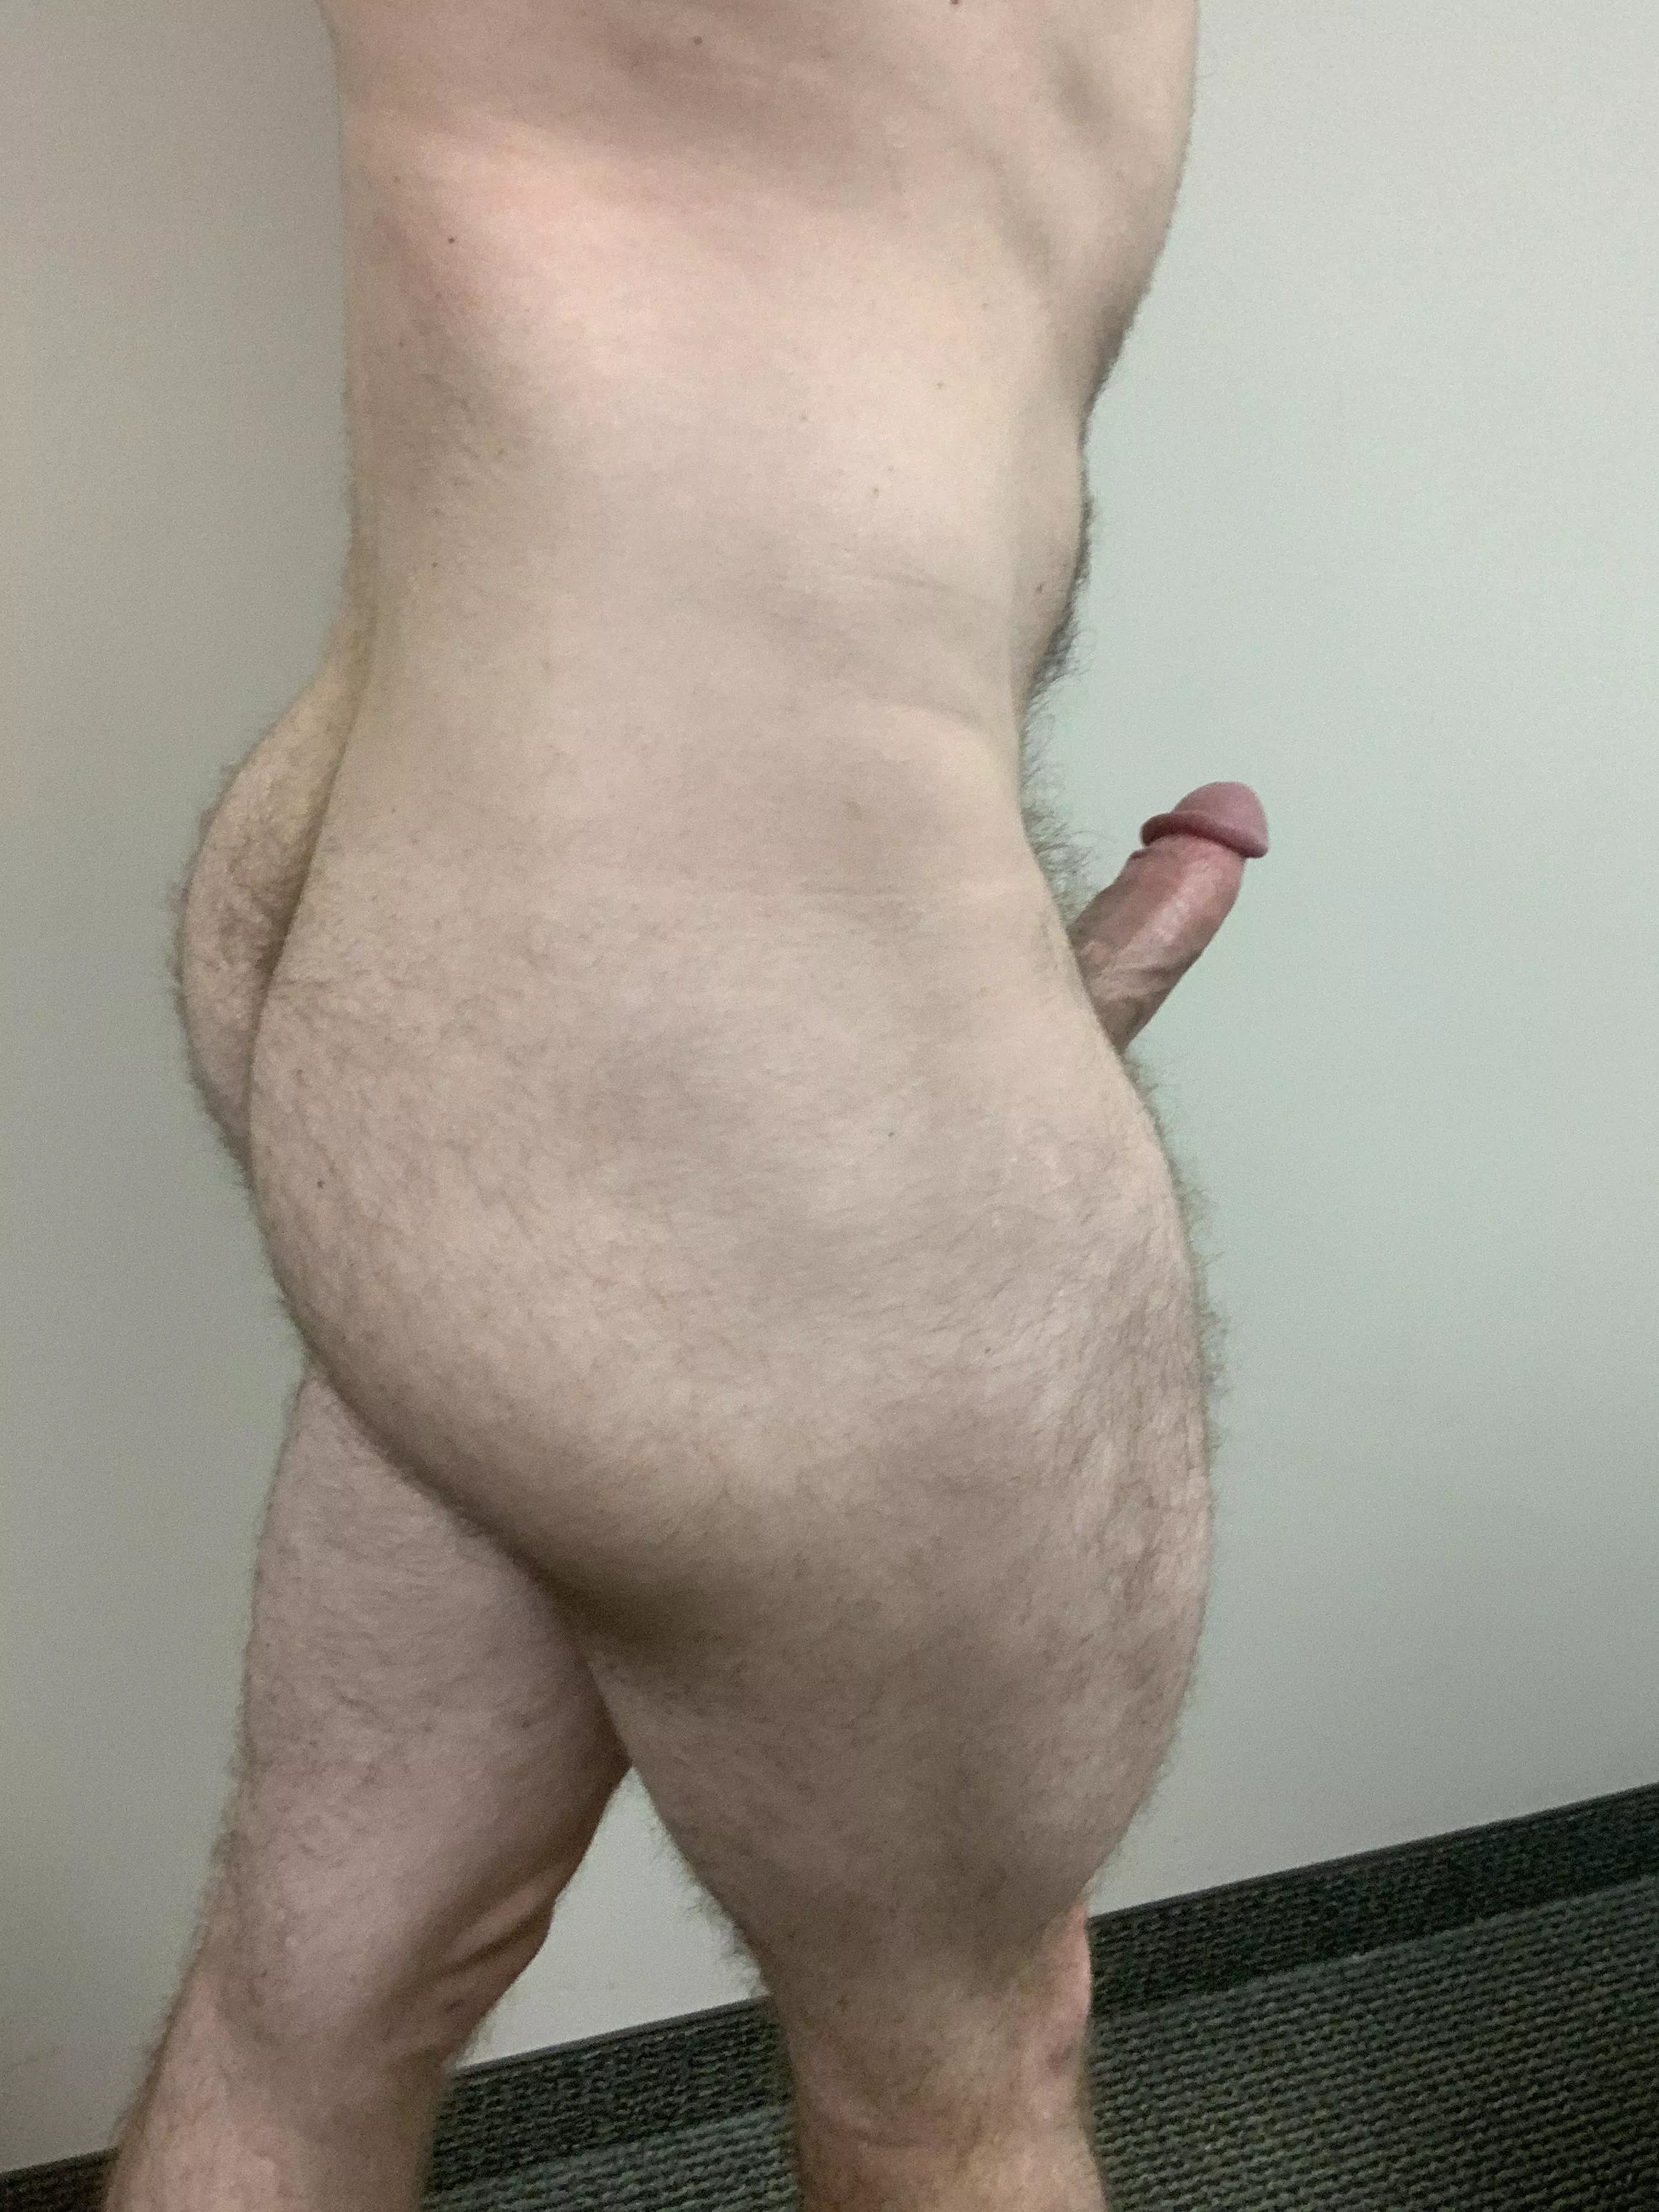 Please Spank Me Nudes Guysfrombehind Nude Pics Org